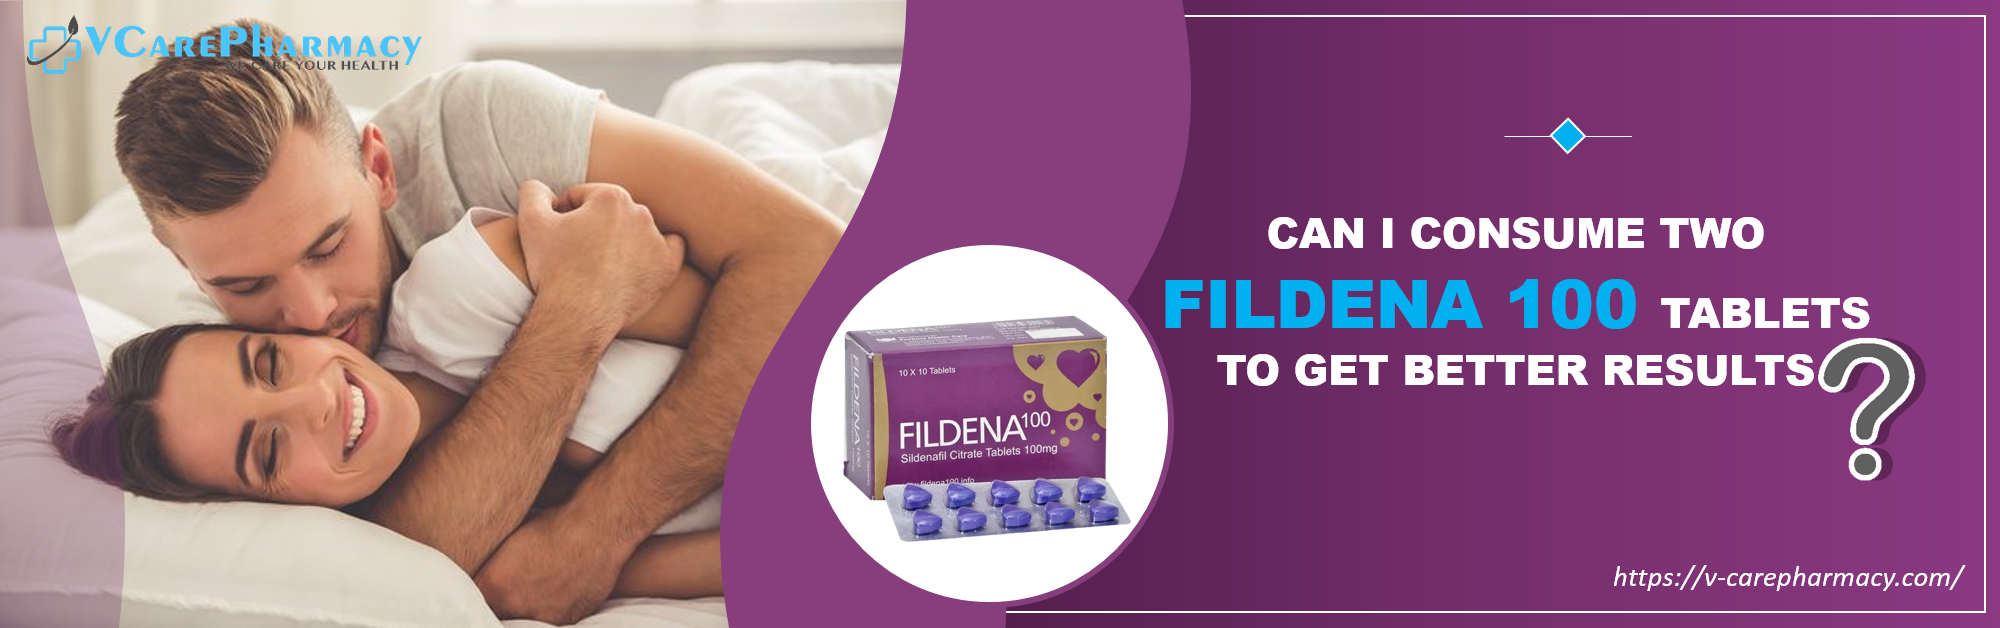 Can I consume two Fildena 100 tablets to get better results?